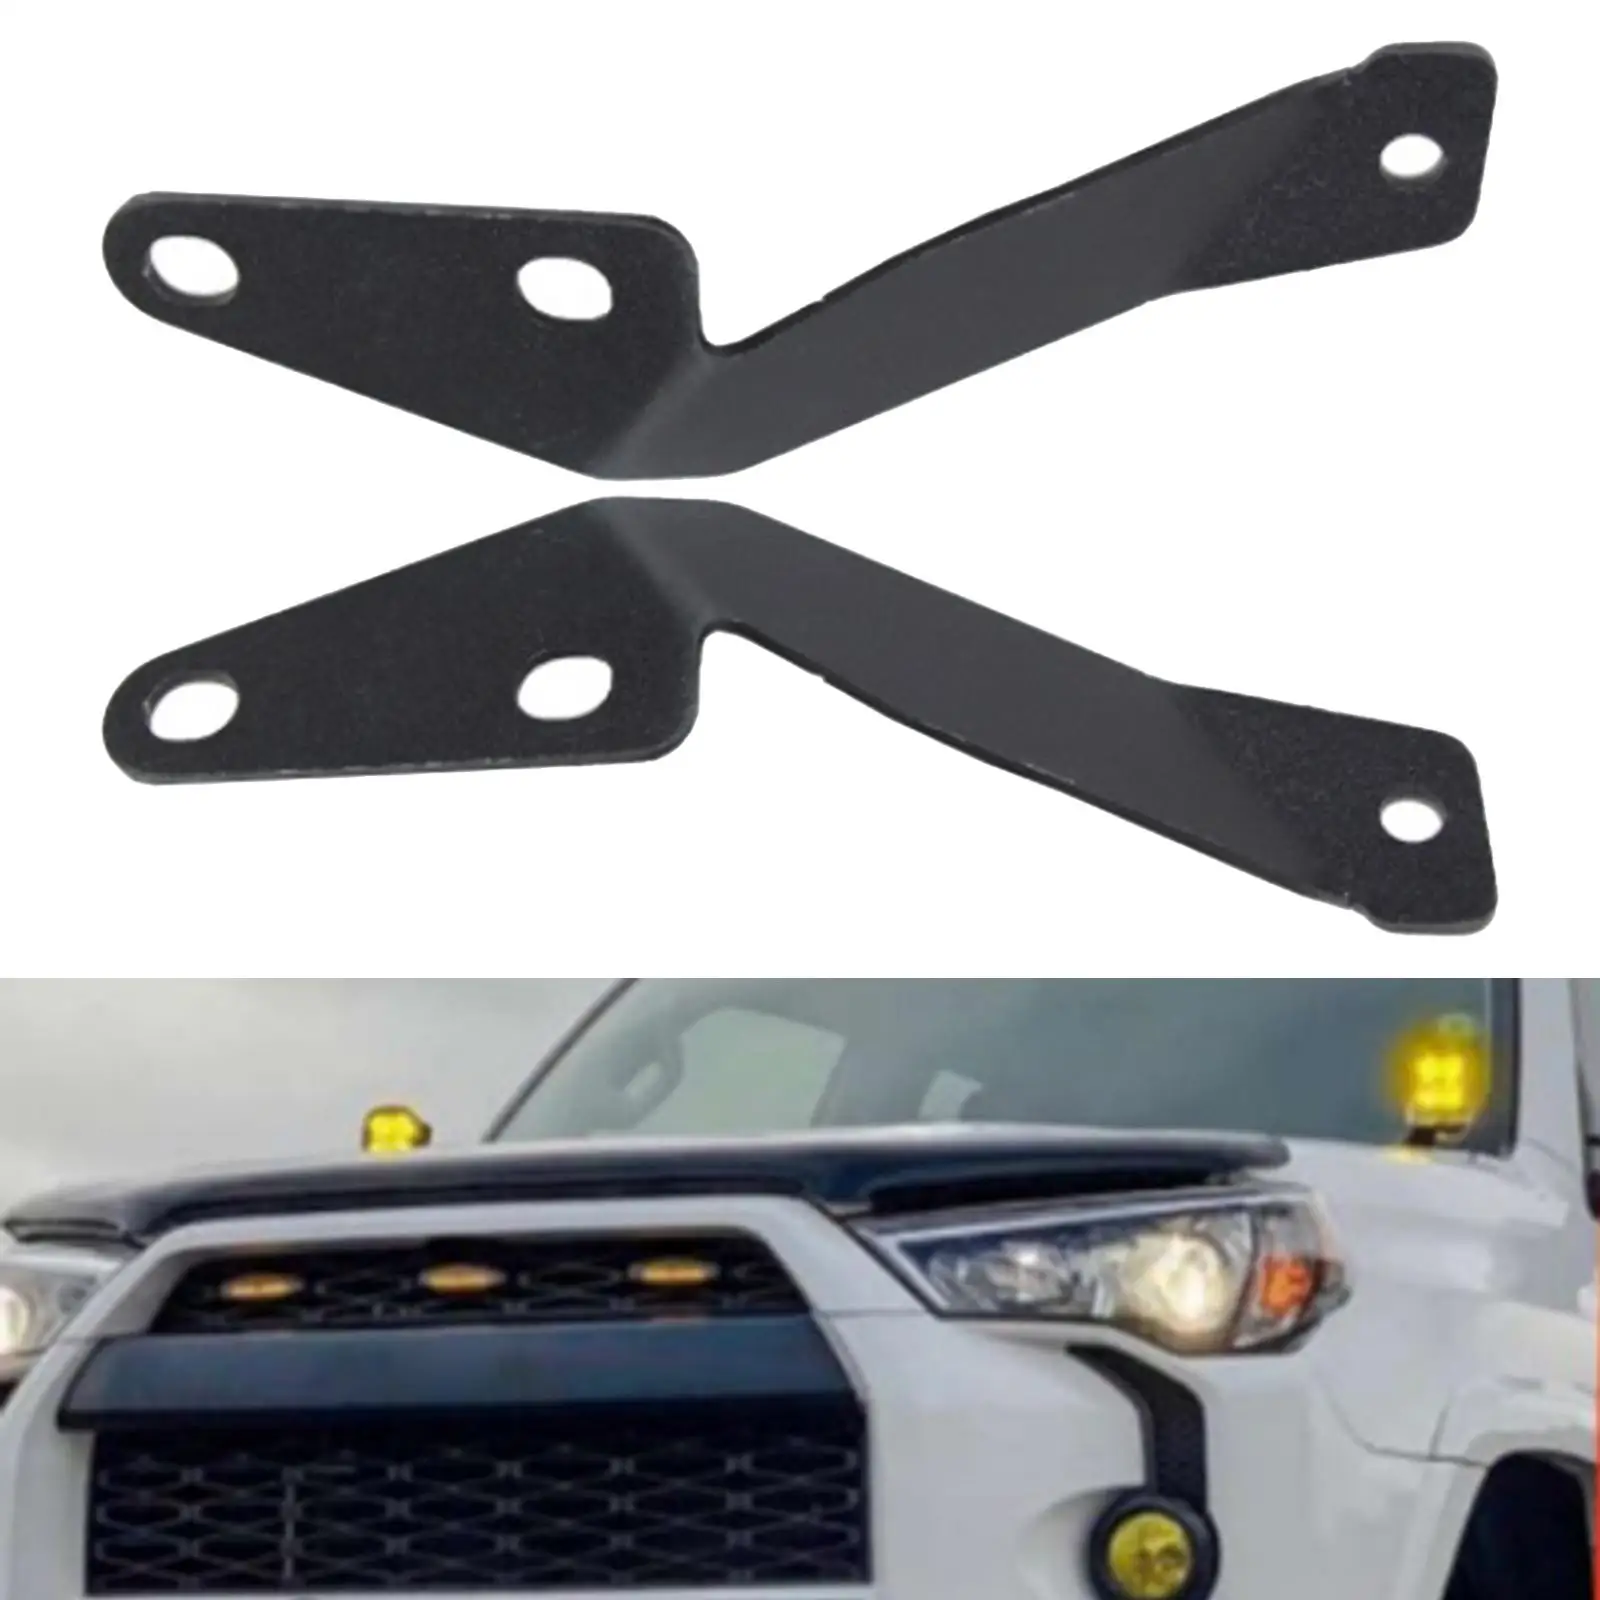 2 Pieces Automotive Ditch Lights Mount Hood Light Mounting Brackets Stainless Steel for 4Runner Replacement Durable